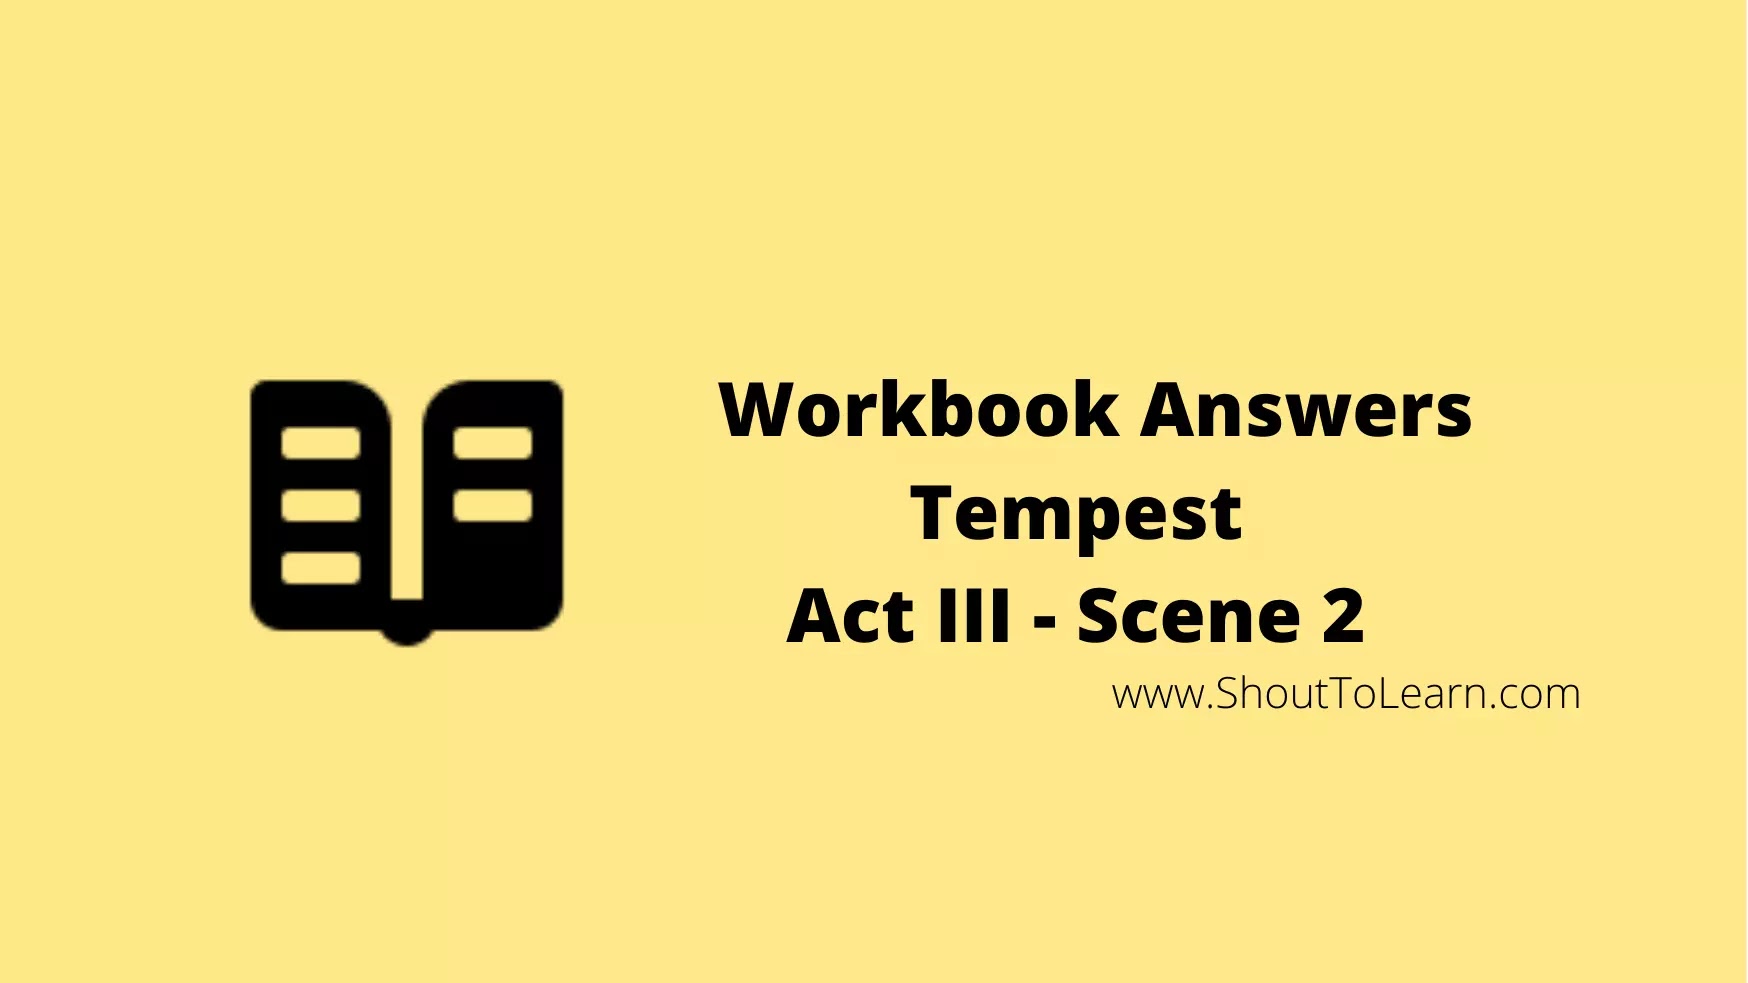 Workbook Answers of Tempest Act 3 Scene 2